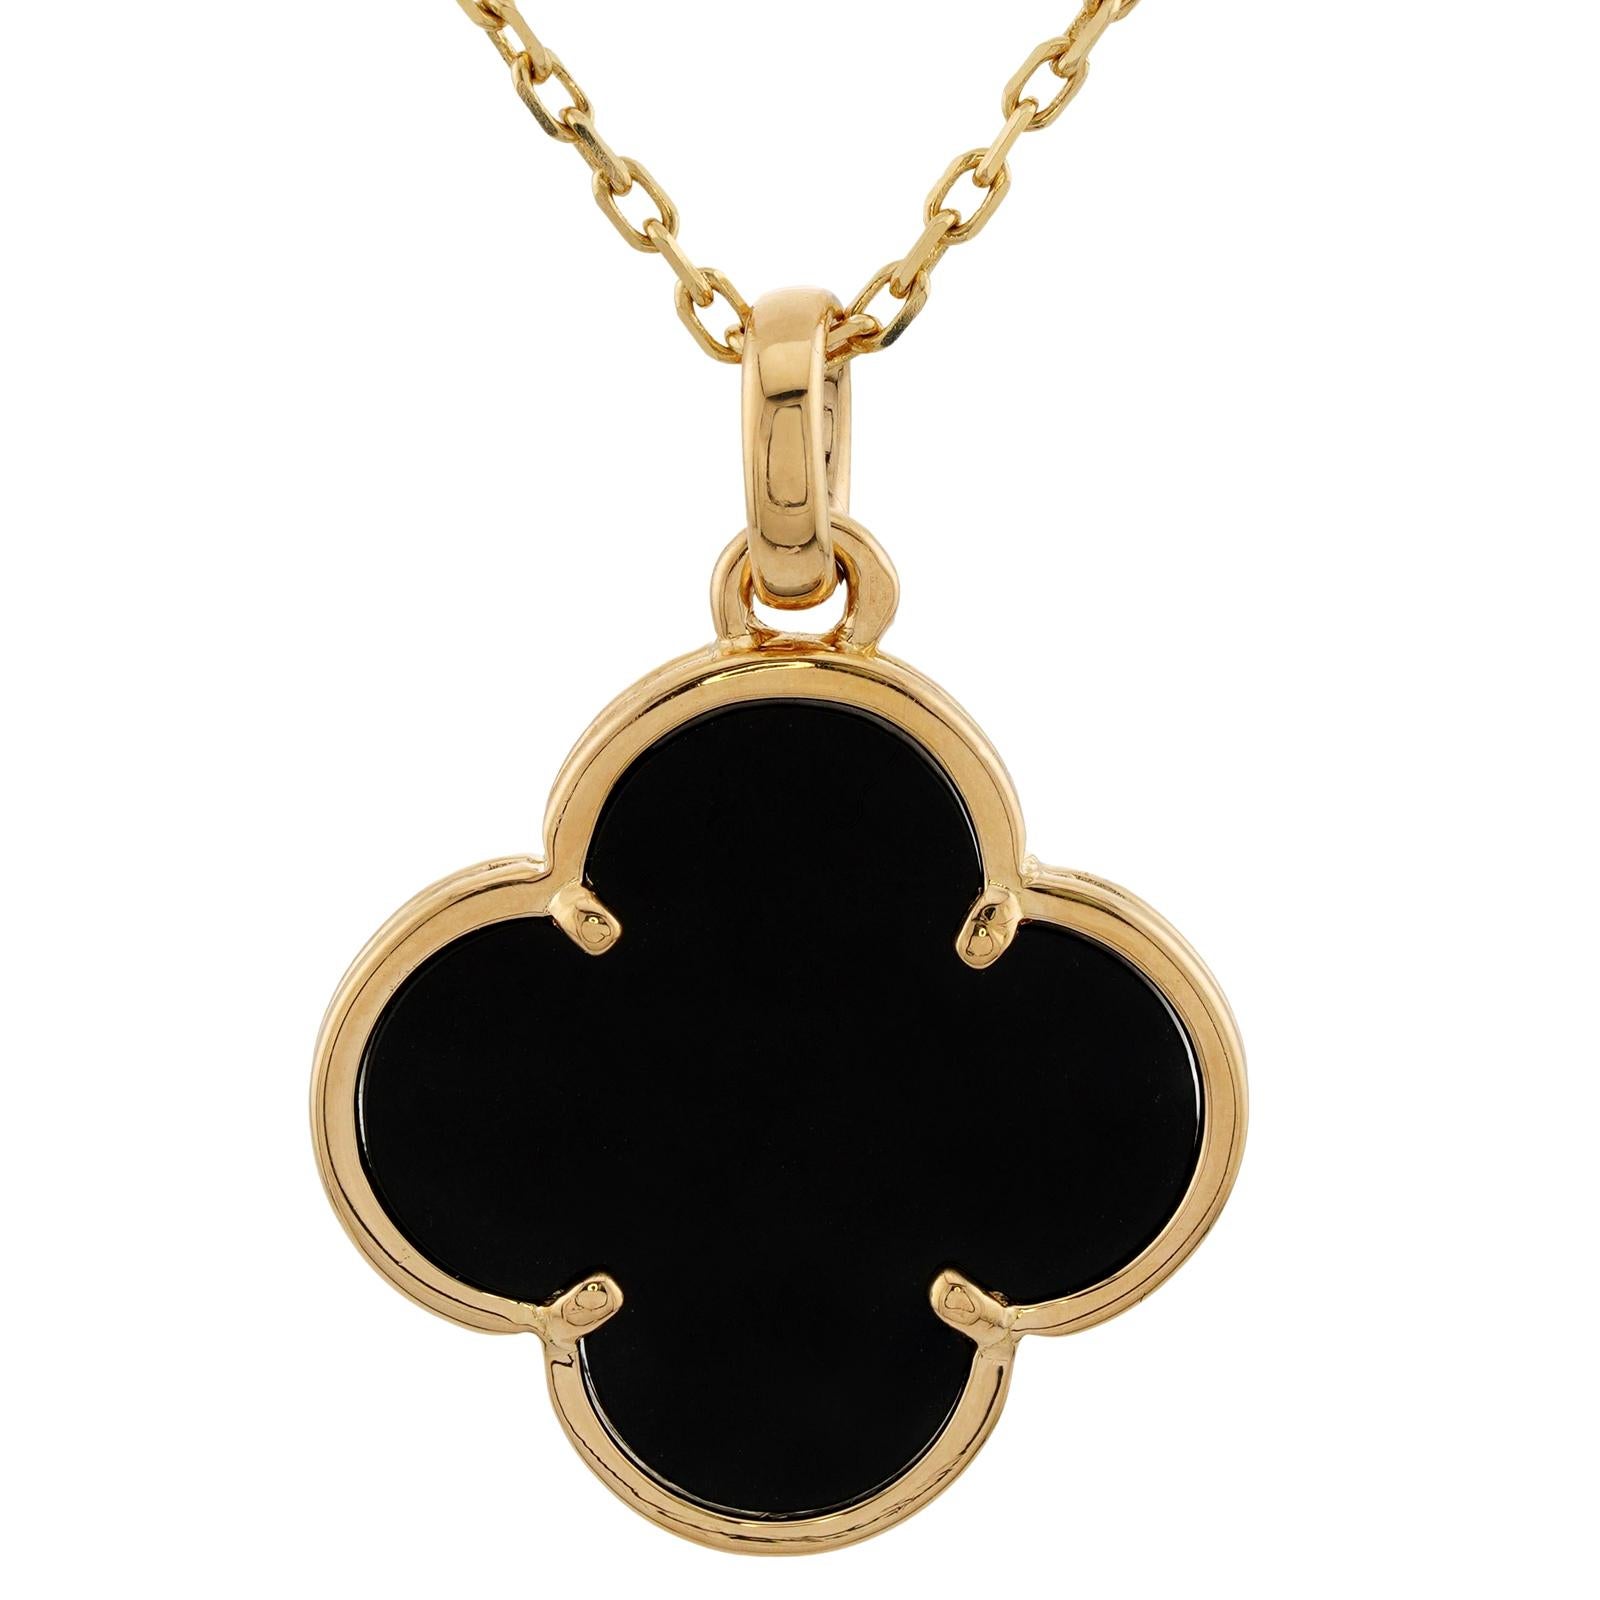 This elegant Van Cleef & Arpels necklace from the classic Magic Alhambra collection features a lucky clover pendant crafted in 18k yellow gold and set with black onyx. The chain length is adjustable from 15 to 18 inches. Made in France circa 1990s.